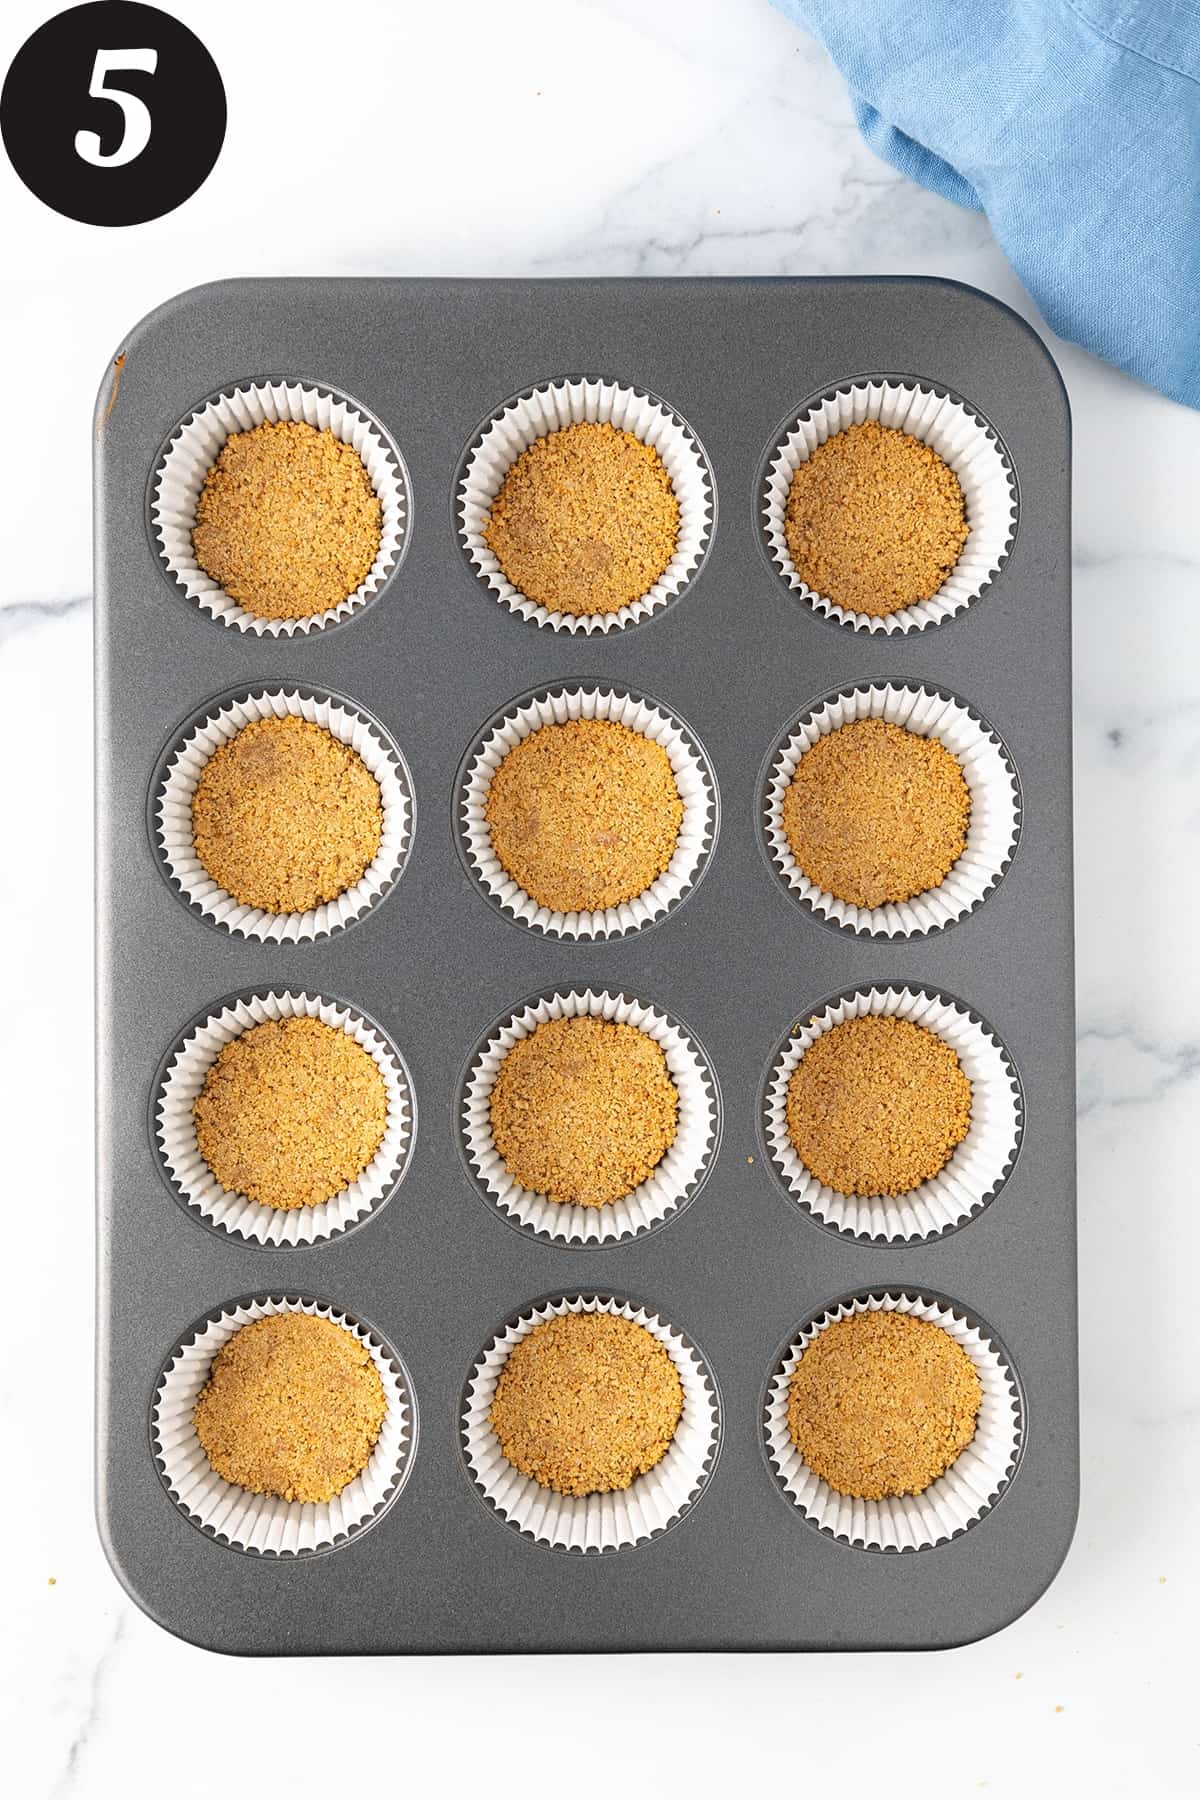 A twelve cup muffin pan filled with white paper liners each with a backed graham cracker crust on a white counter.